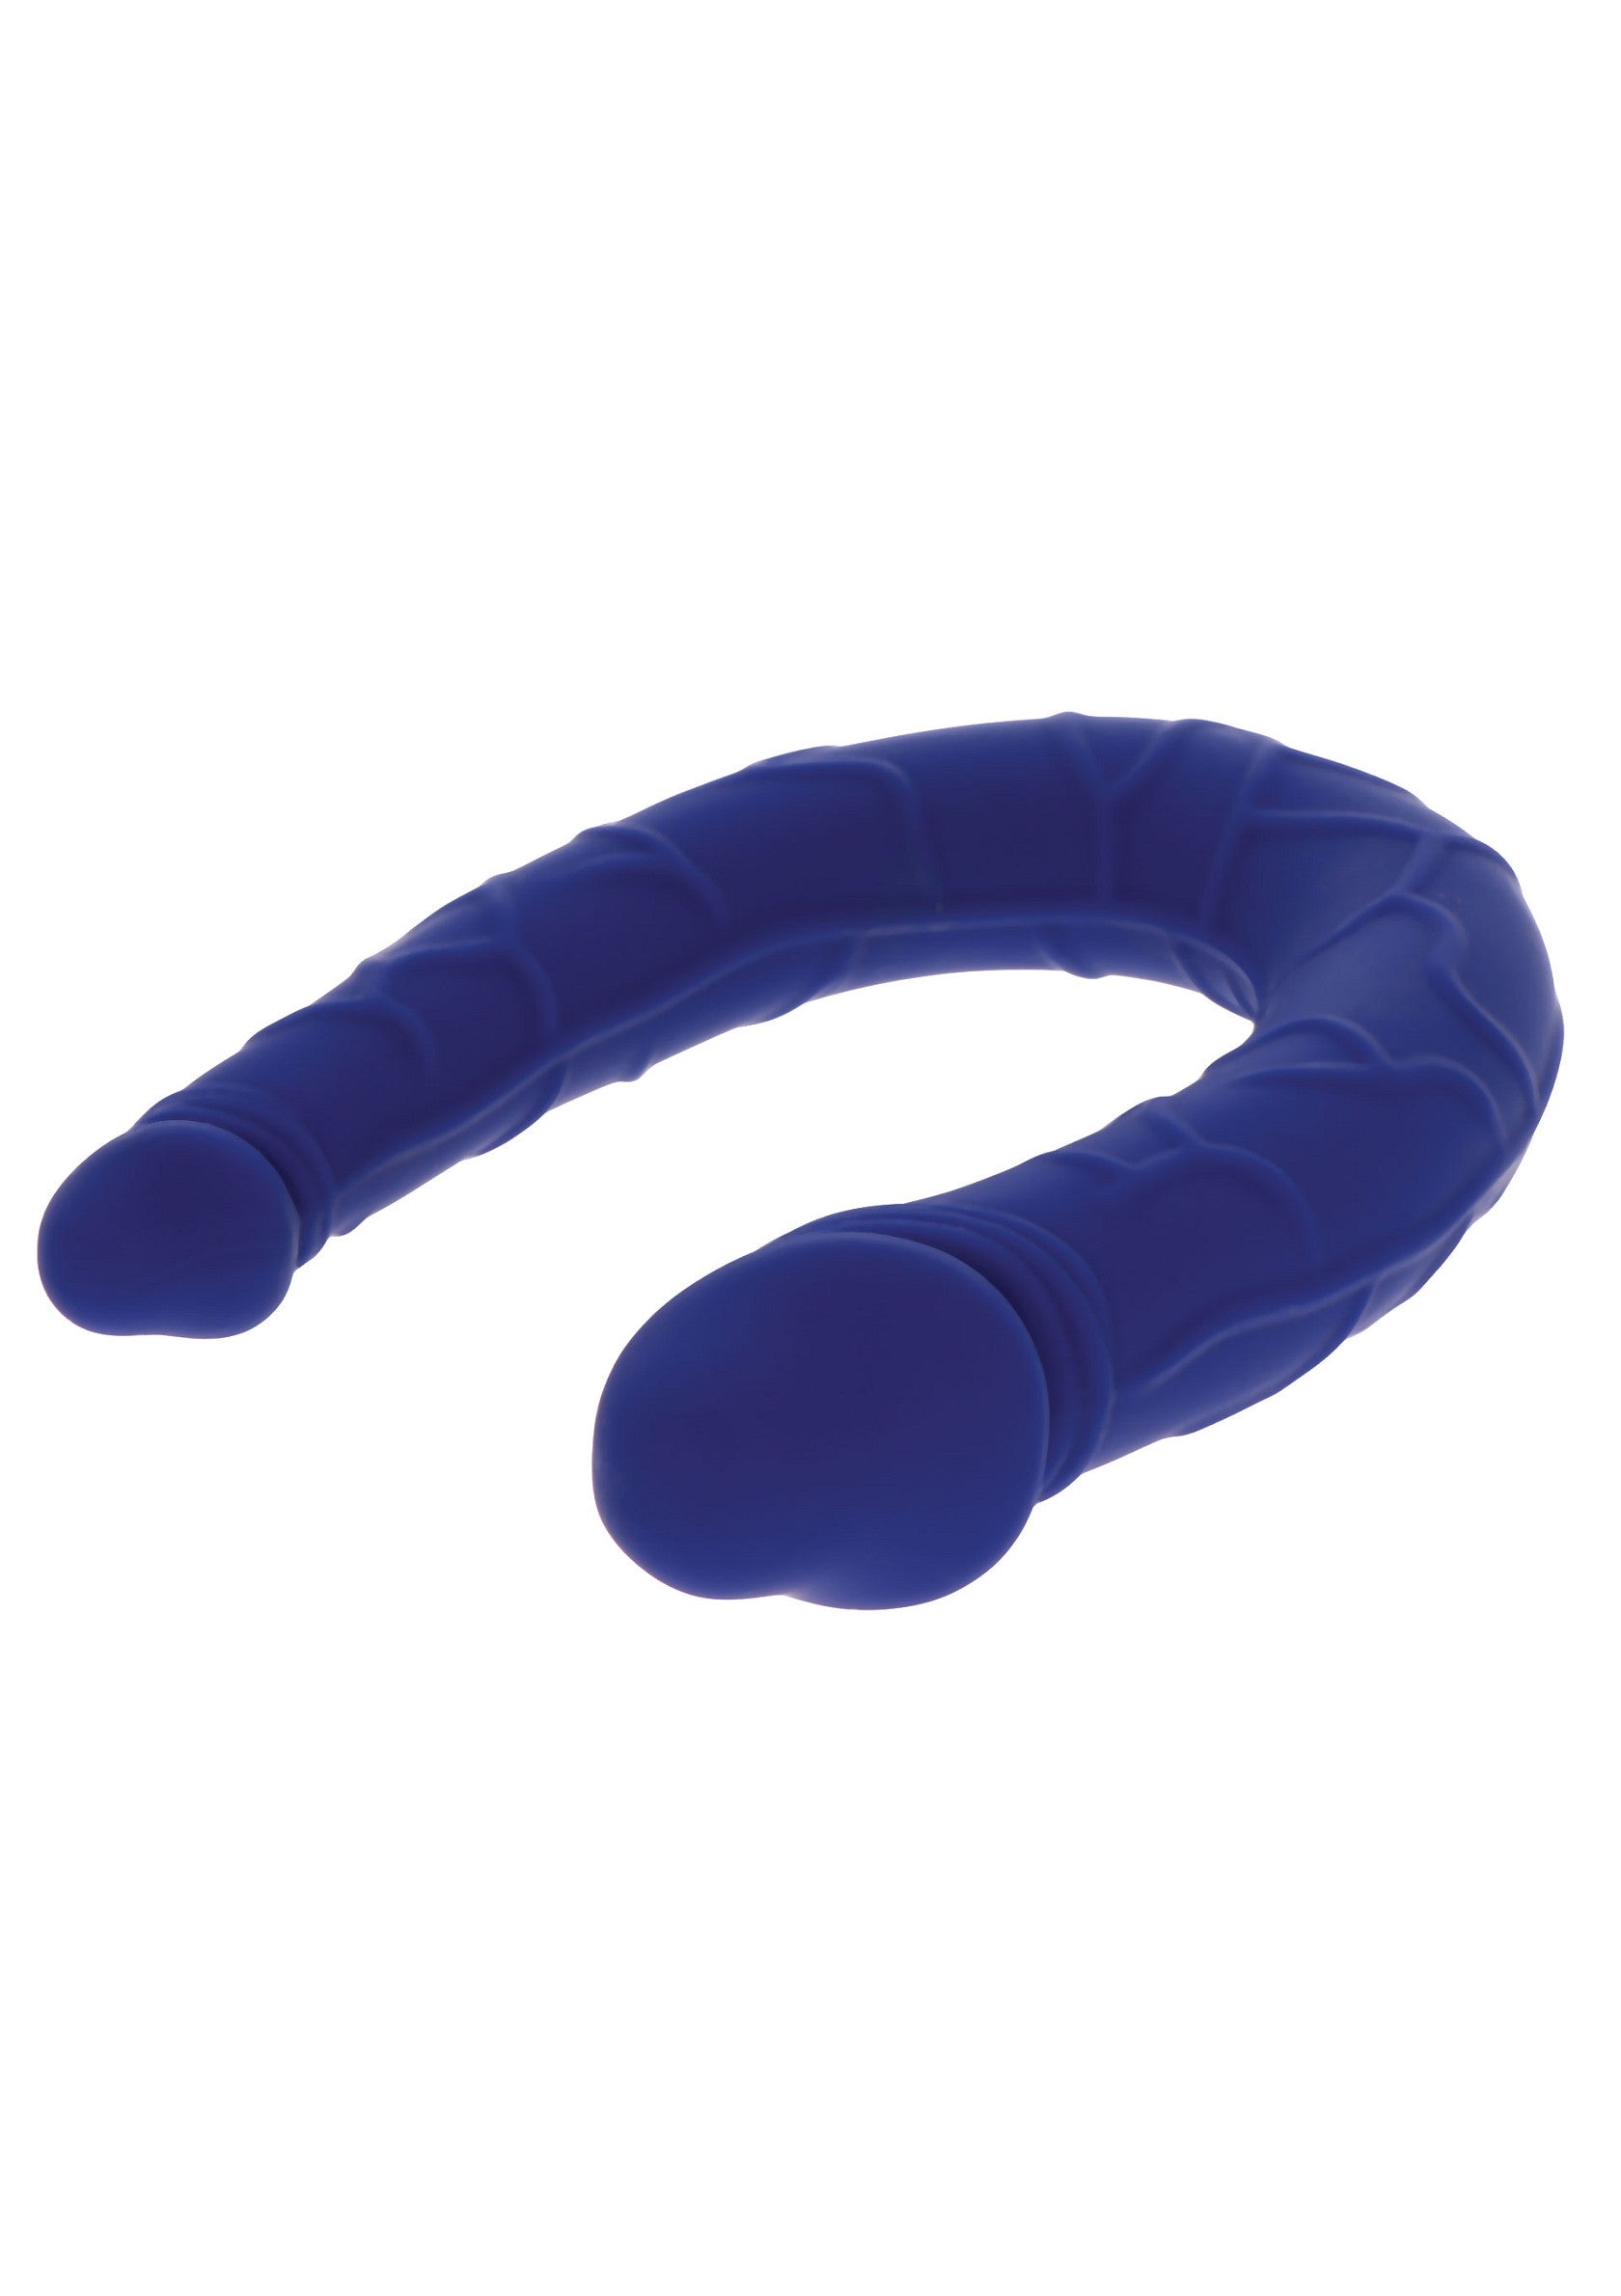 ToyJoy Get Real Realistic Mini Double Dong BLUE - 3